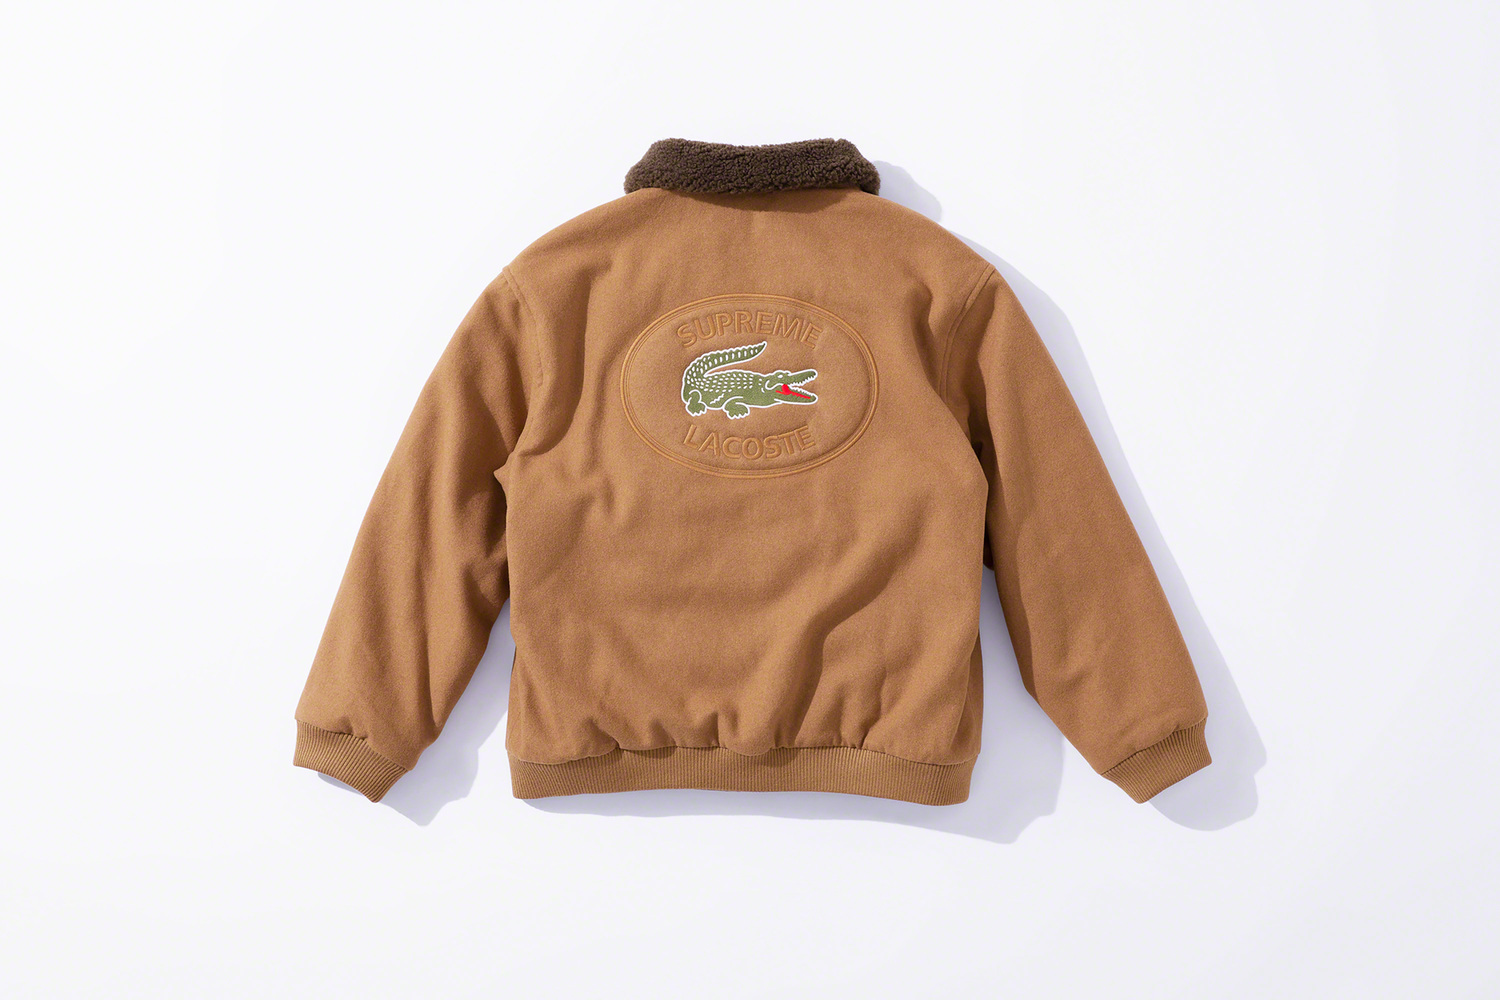 Lacoste x Supreme Fall 2019 Collection